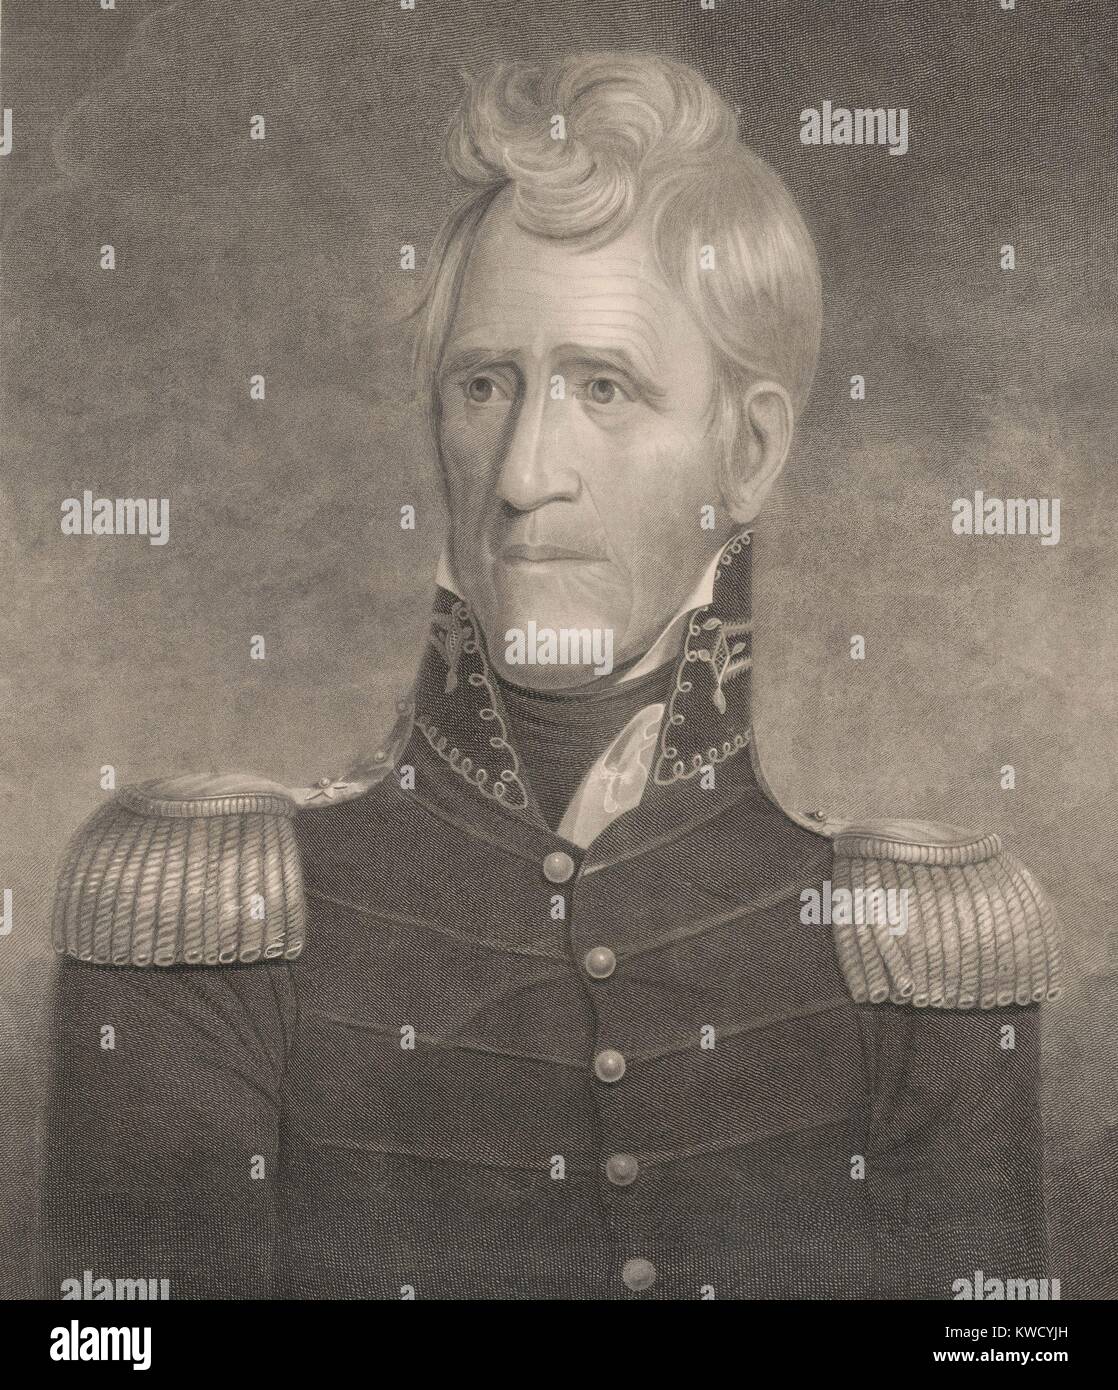 Andrew Jackson, portrait engraving after a 1817 original painting by Ralph E. W. Earl, of Nashville. Engraving by Charles Culter Torrey, born in Massachusetts and died in Nashville, 1827 (BSLOC 2017 6 3) Stock Photo